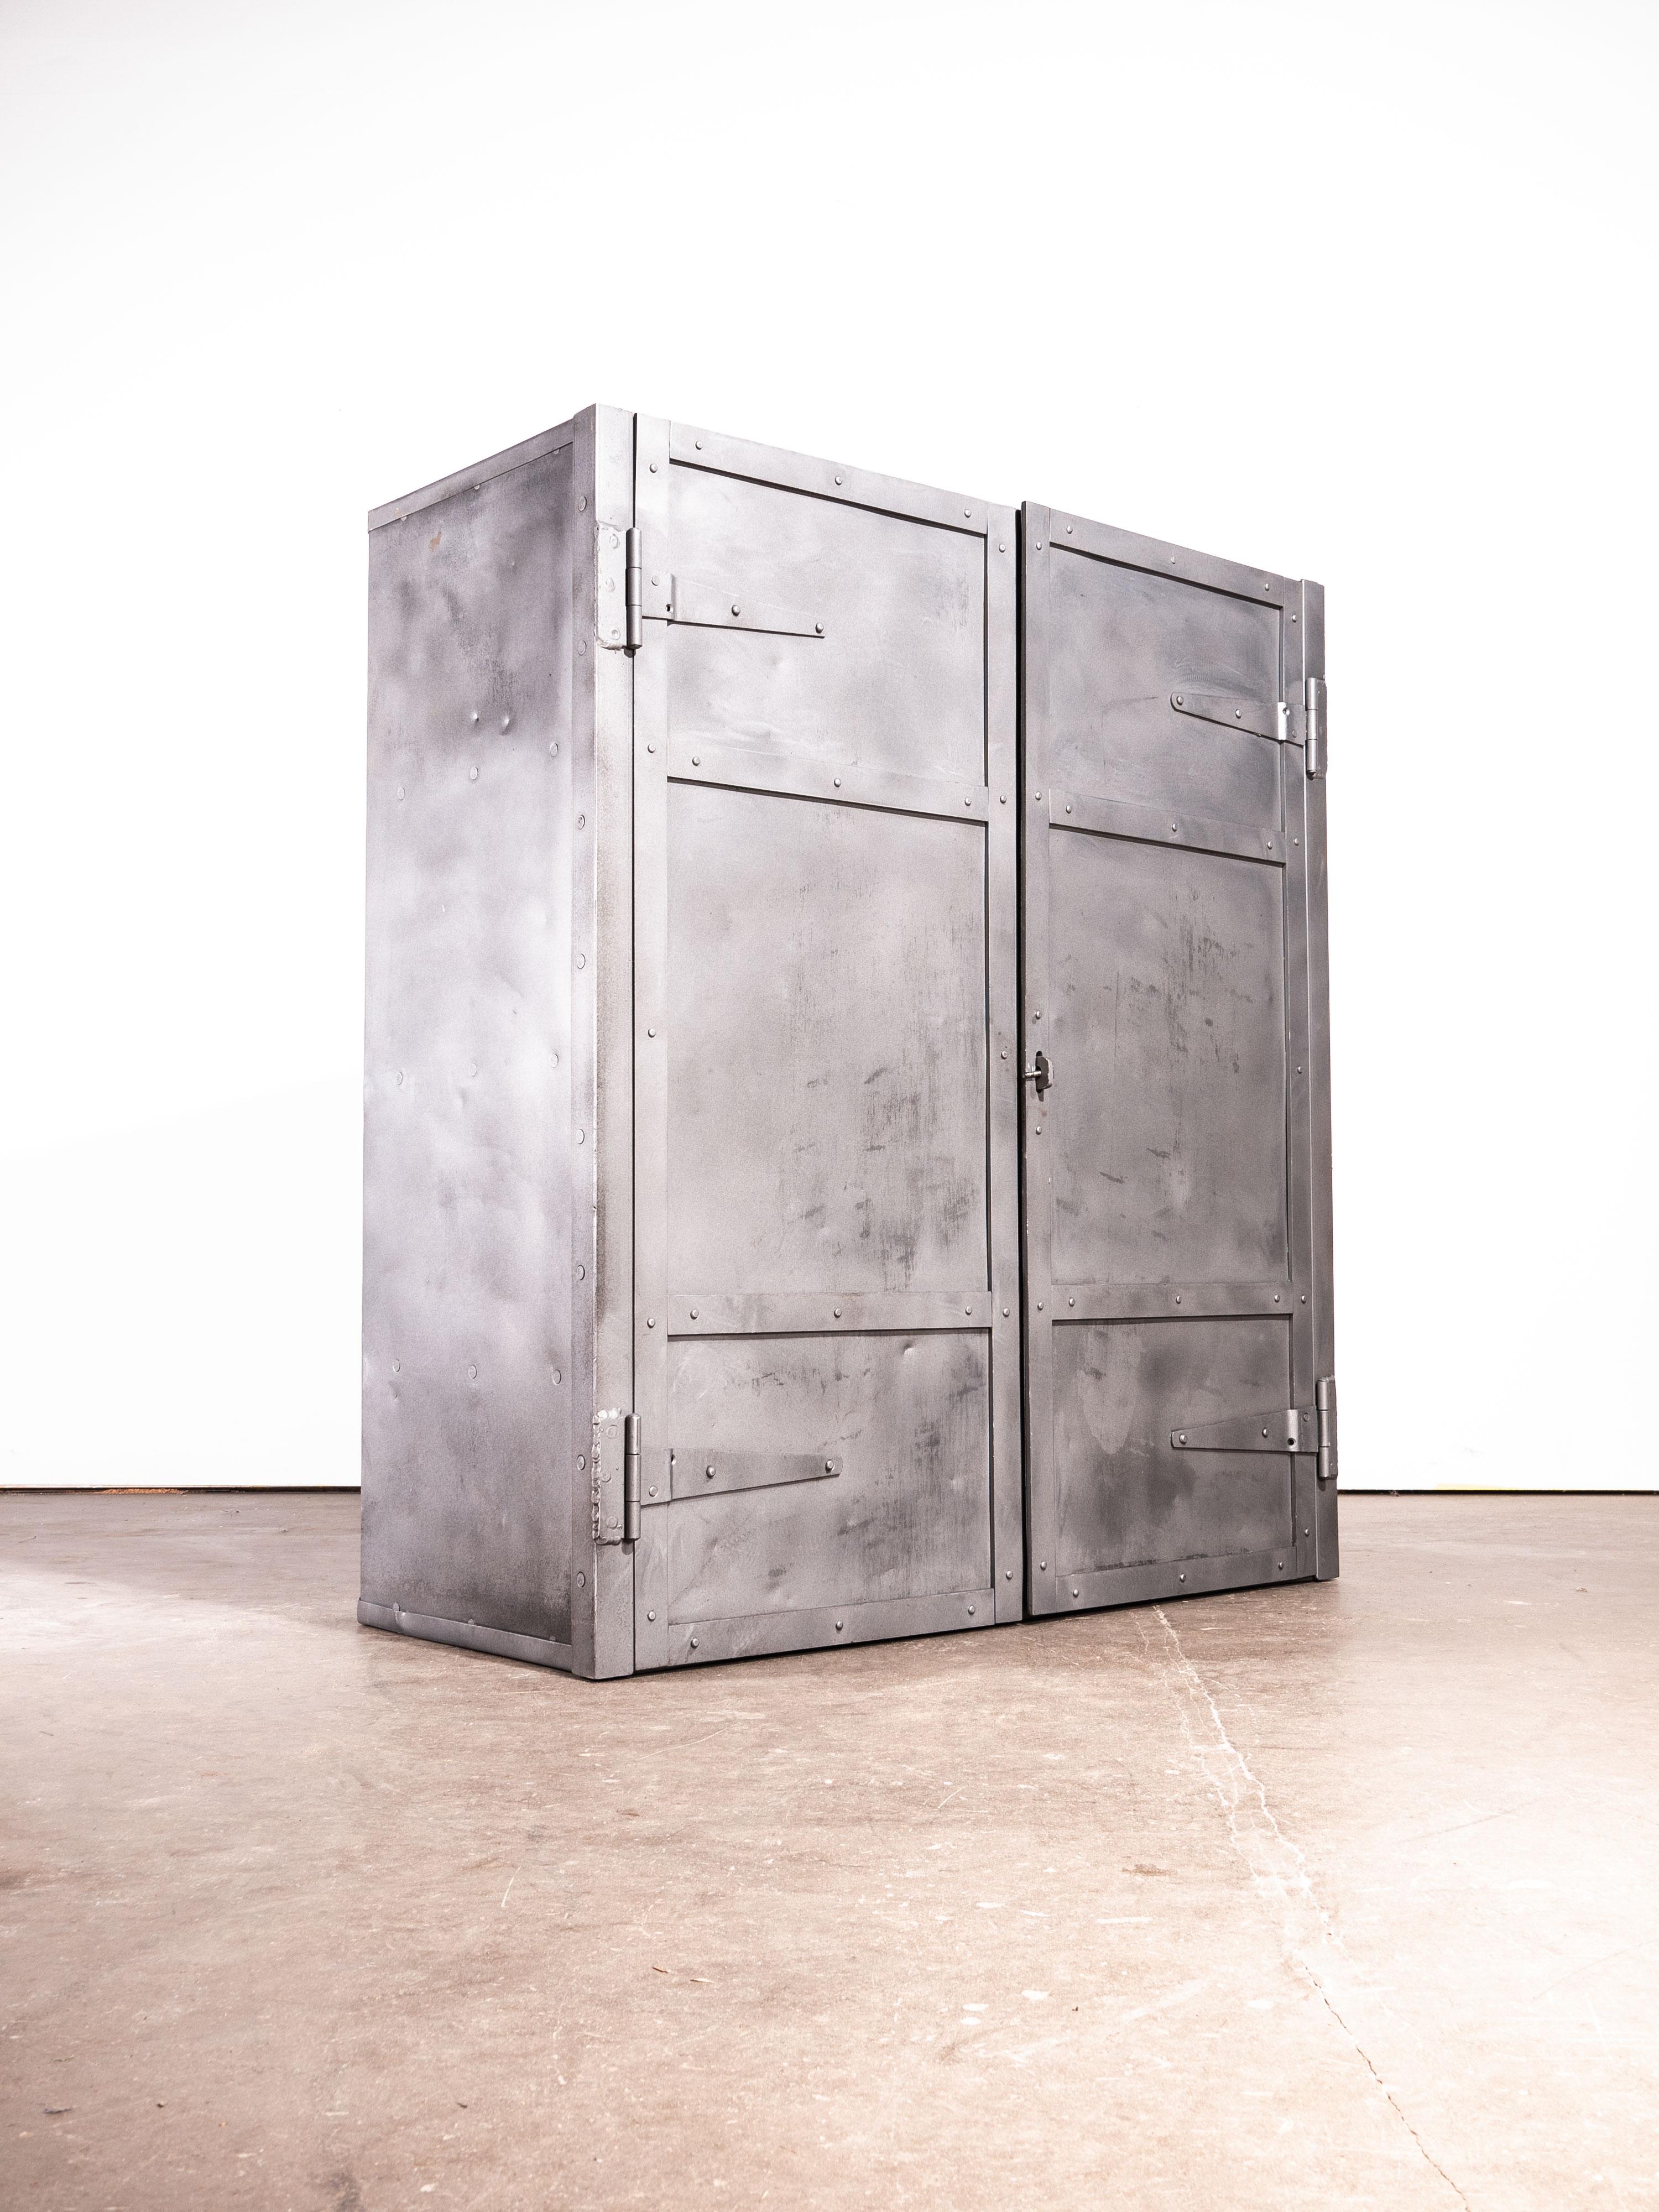 1950s English industrial metal storage cabinet, cupboard. Sourced from a steel foundry outside Manchester this well proportioned heavy duty cabinet was used to store the metal workers tools. Internally the shelves are at fixed heights although